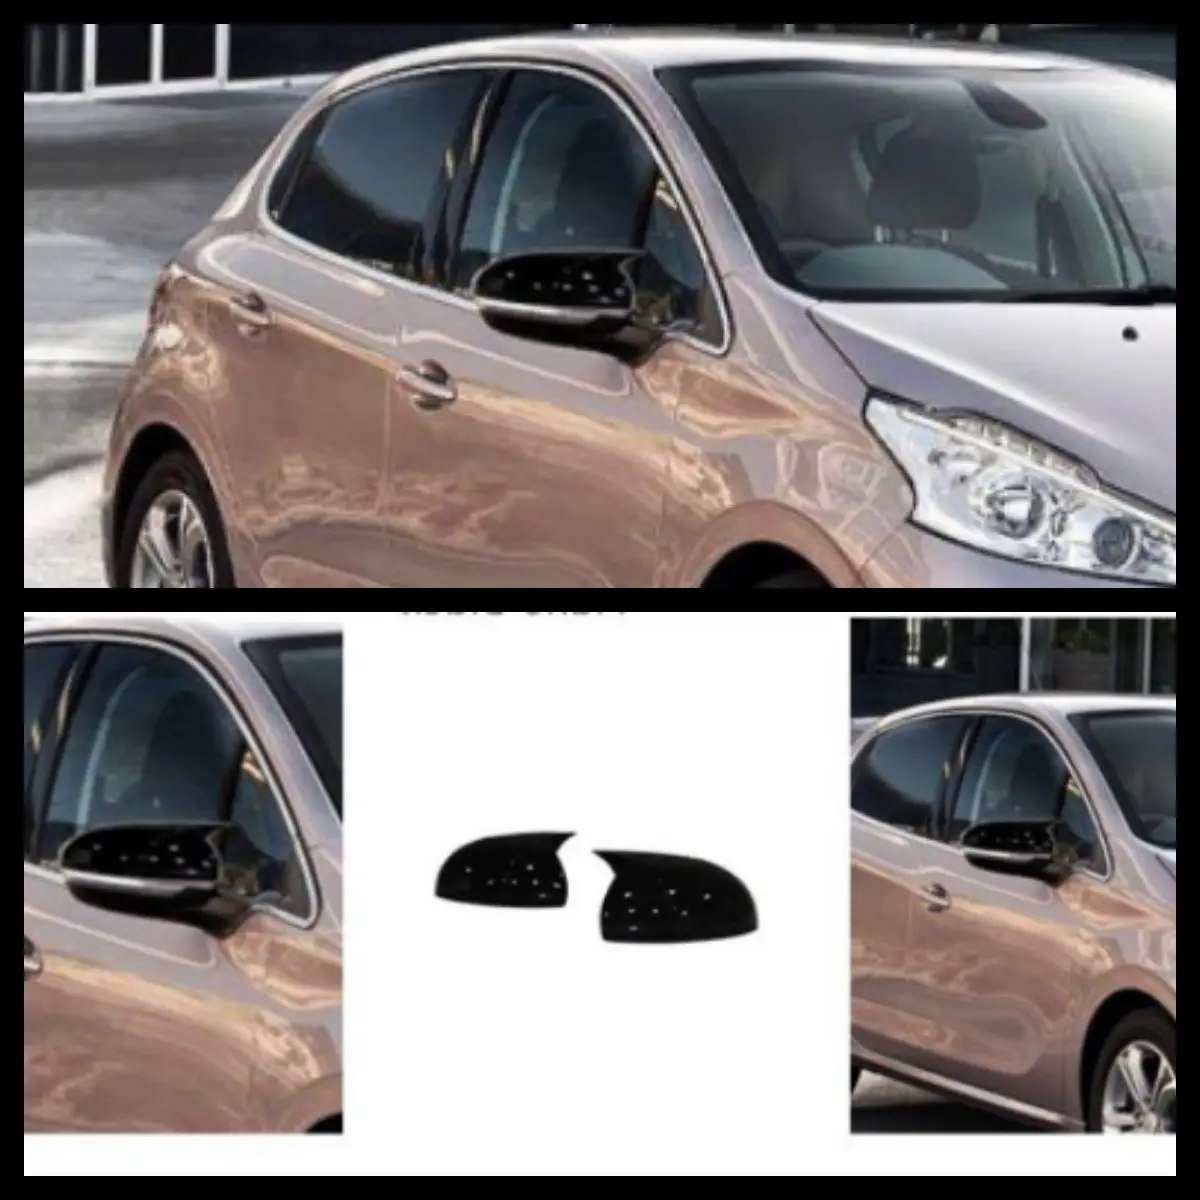 NEW FOR PEUGEOT 208 2012 - 2019 WING MIRROR COVER CAP BLACK RIGHT O/S